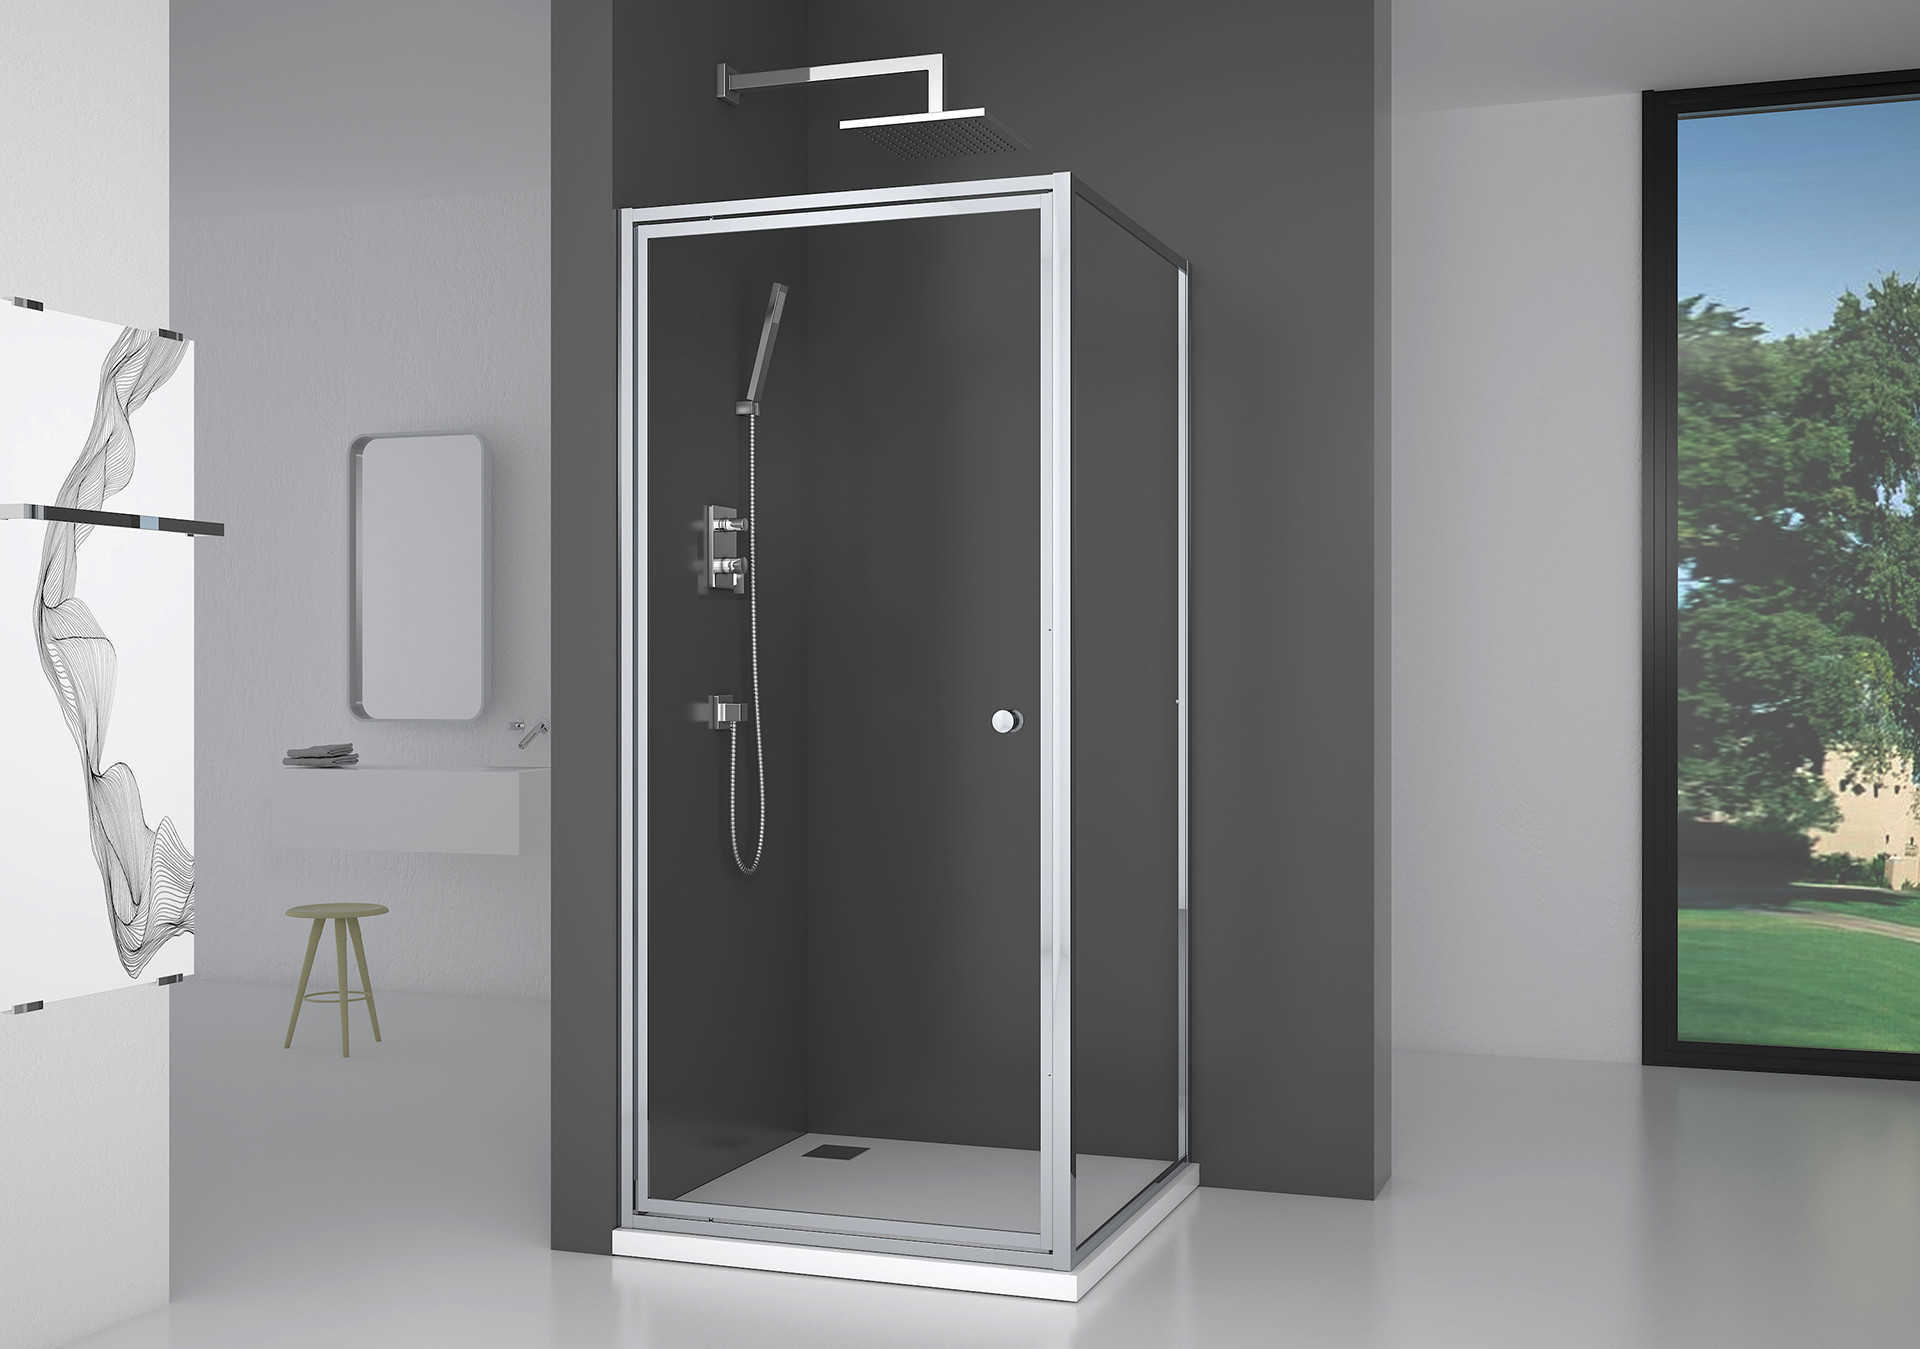 Are there any specific considerations for small bathrooms when choosing a shower enclosure?